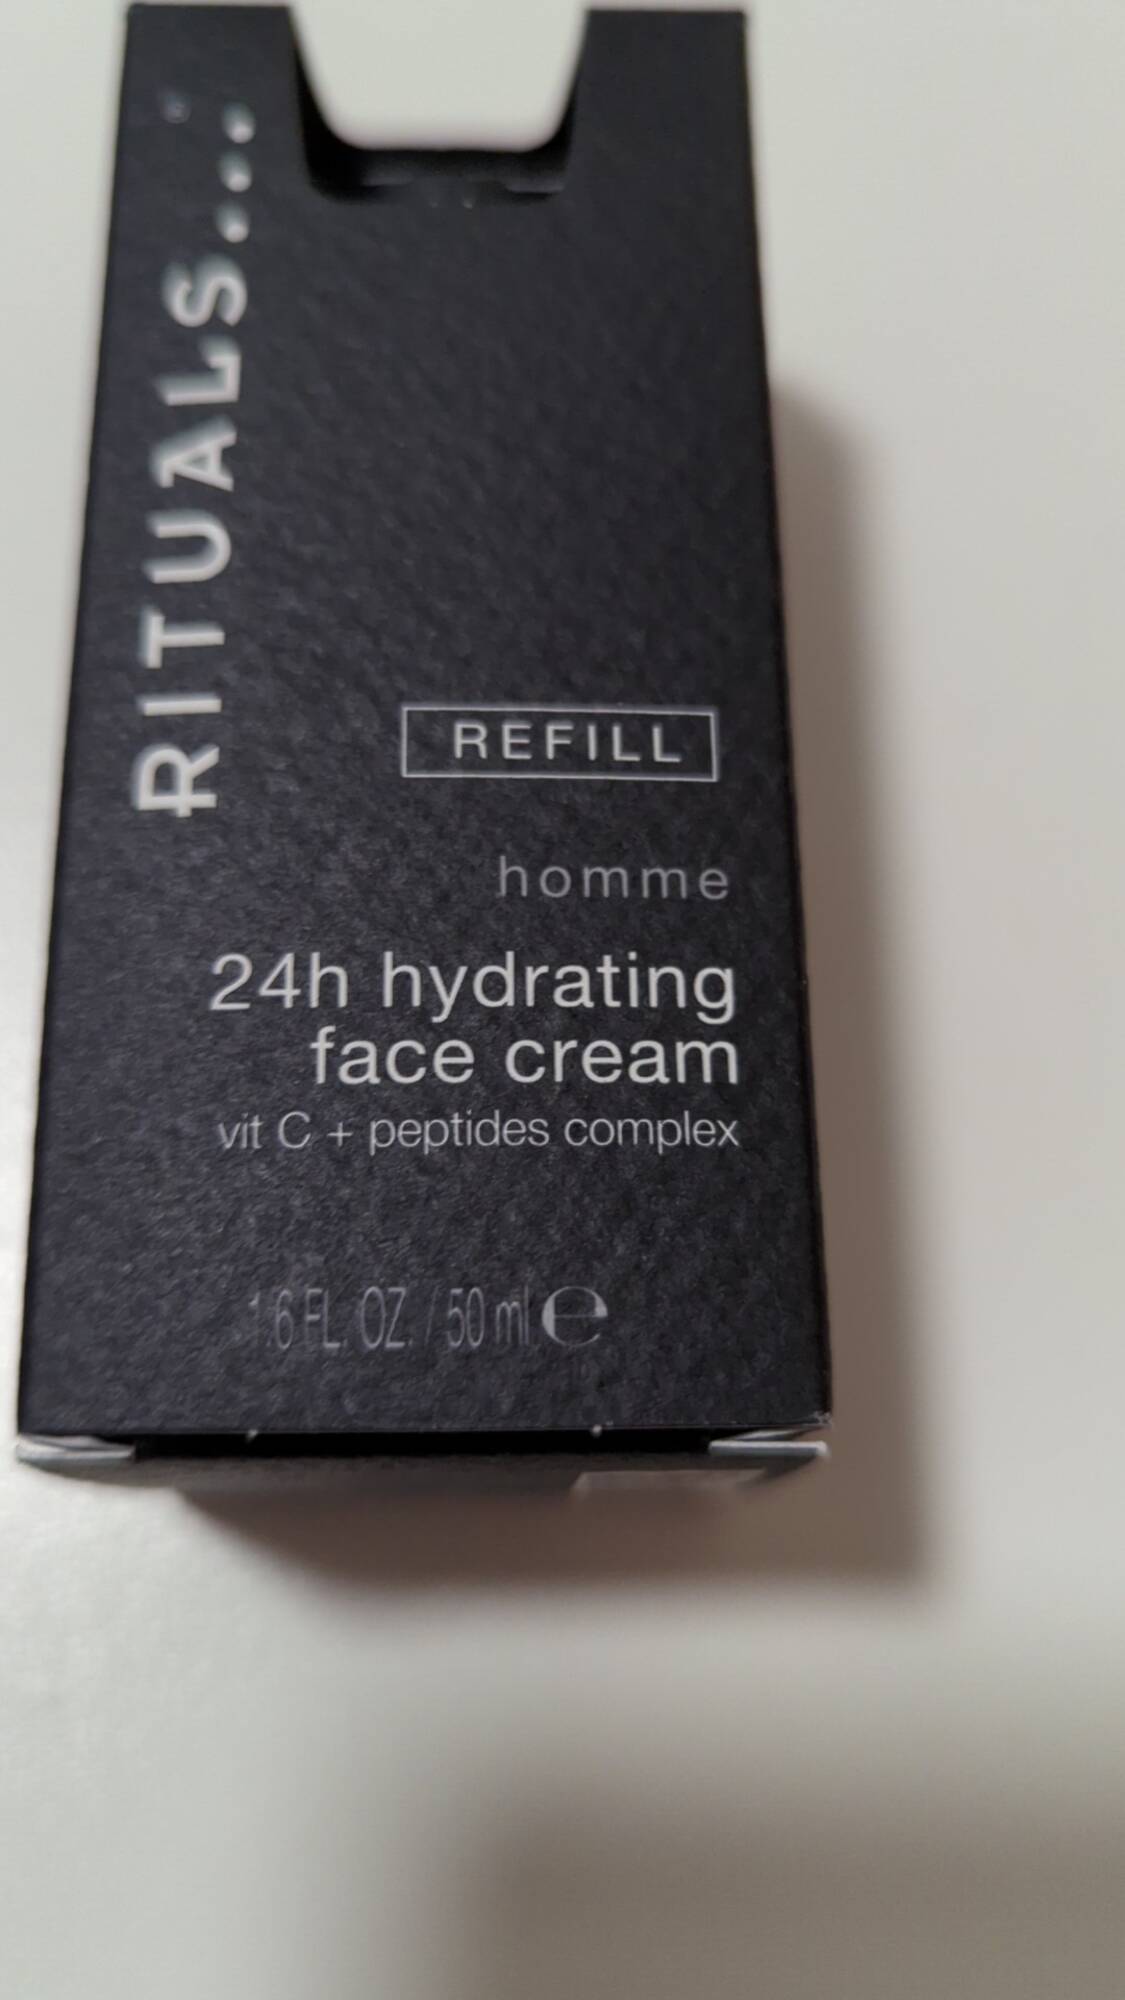 RITUALS - Refill homme - 24h hydrating face cream